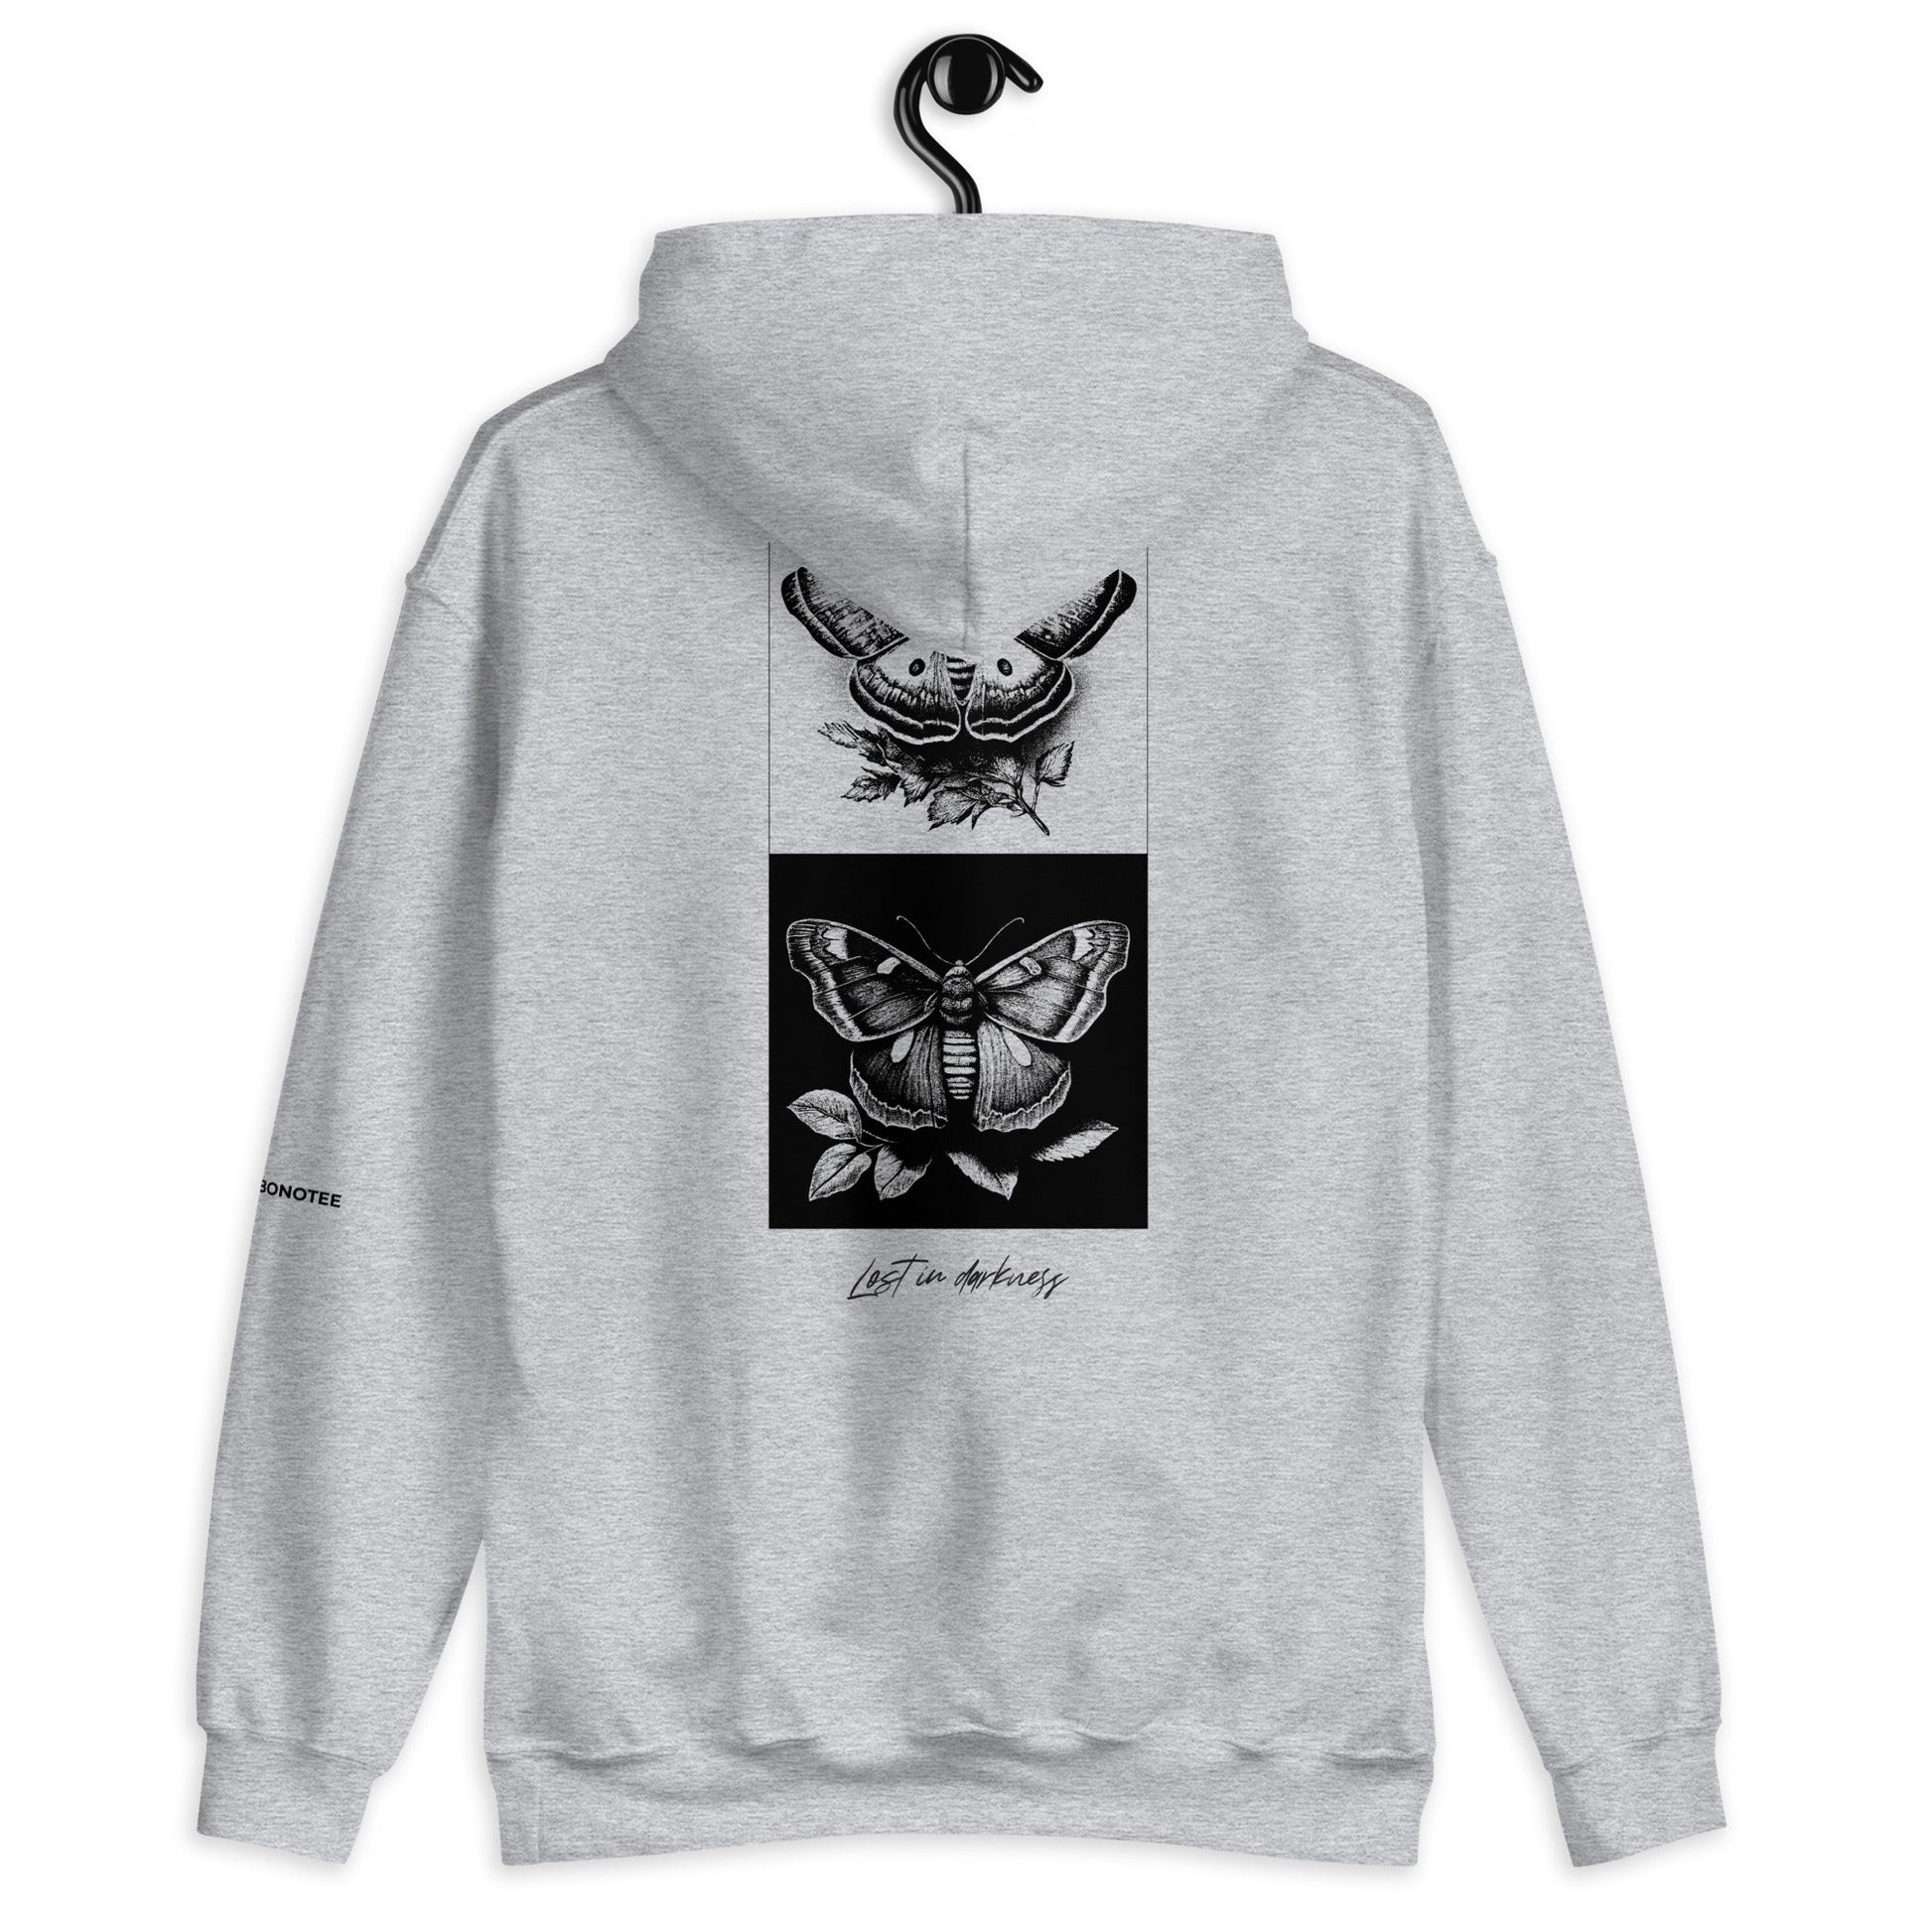 LOST IN DARKNESS Hoodie - Bonotee